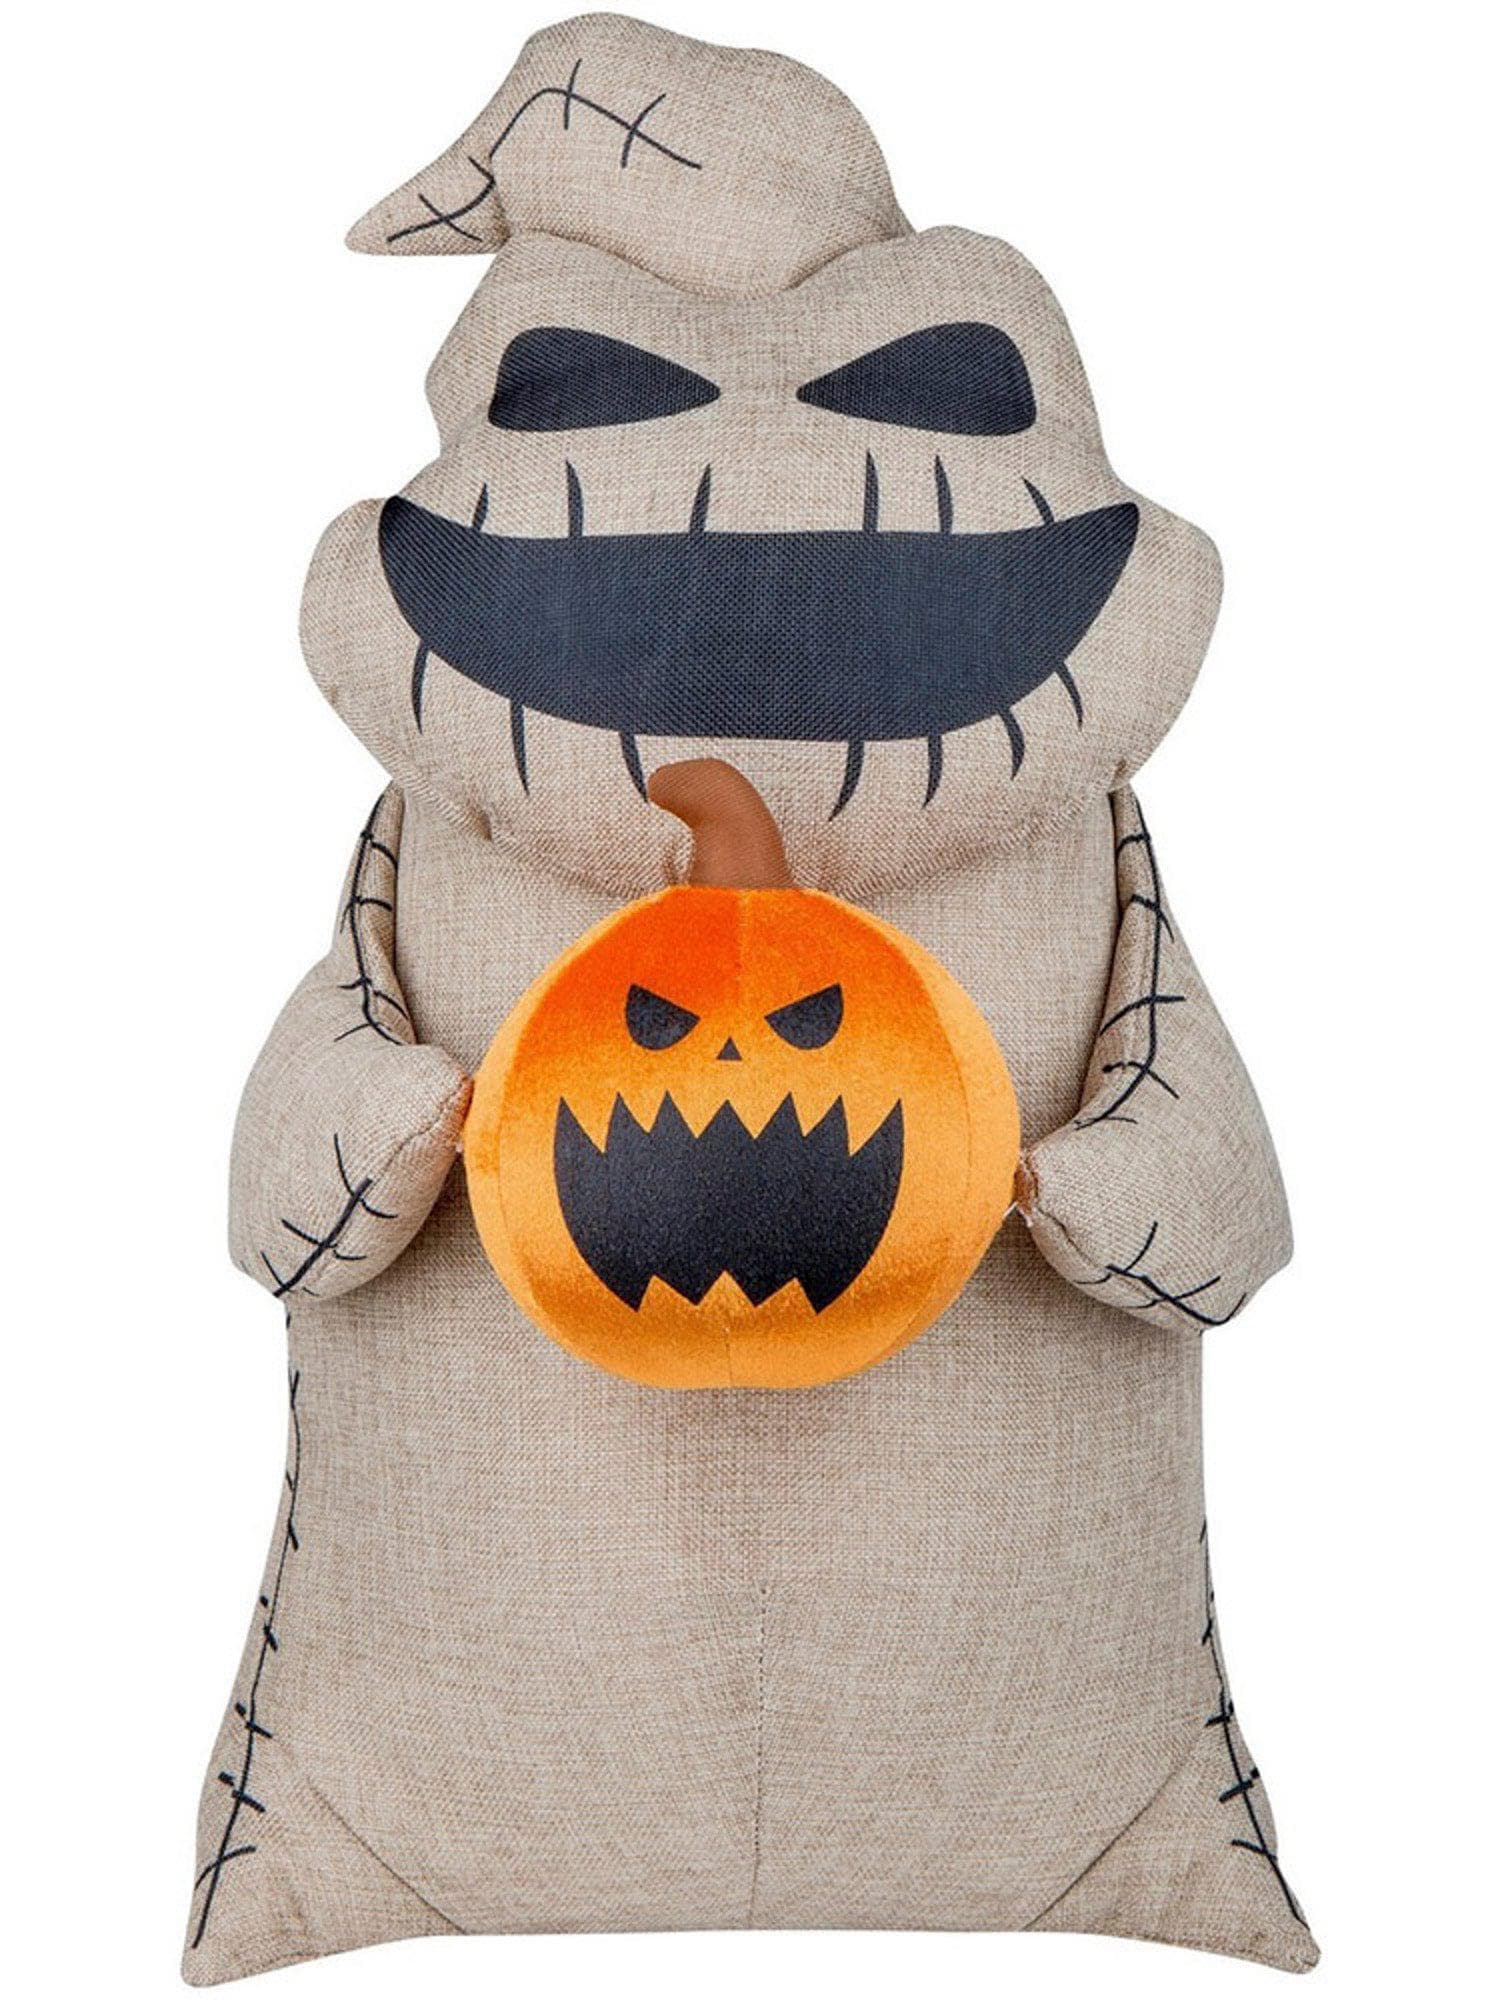 21 Inch The Nightmare Before Christmas Oogie Boogie Plush Front Door Greeter - costumes.com